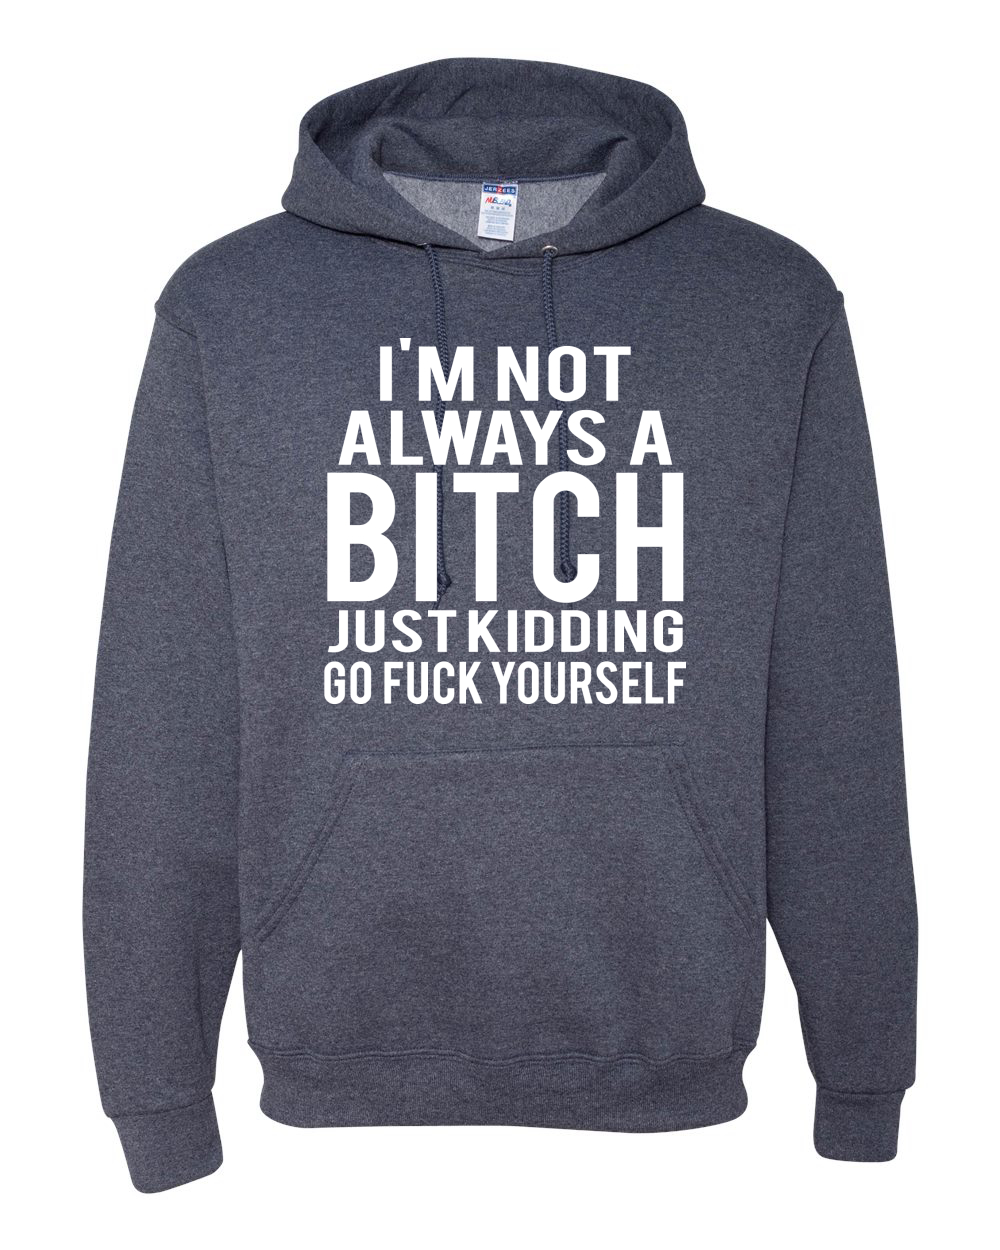 Im Not Always A Bitch Funny Novelty Hoodie Hoody hooded Top 